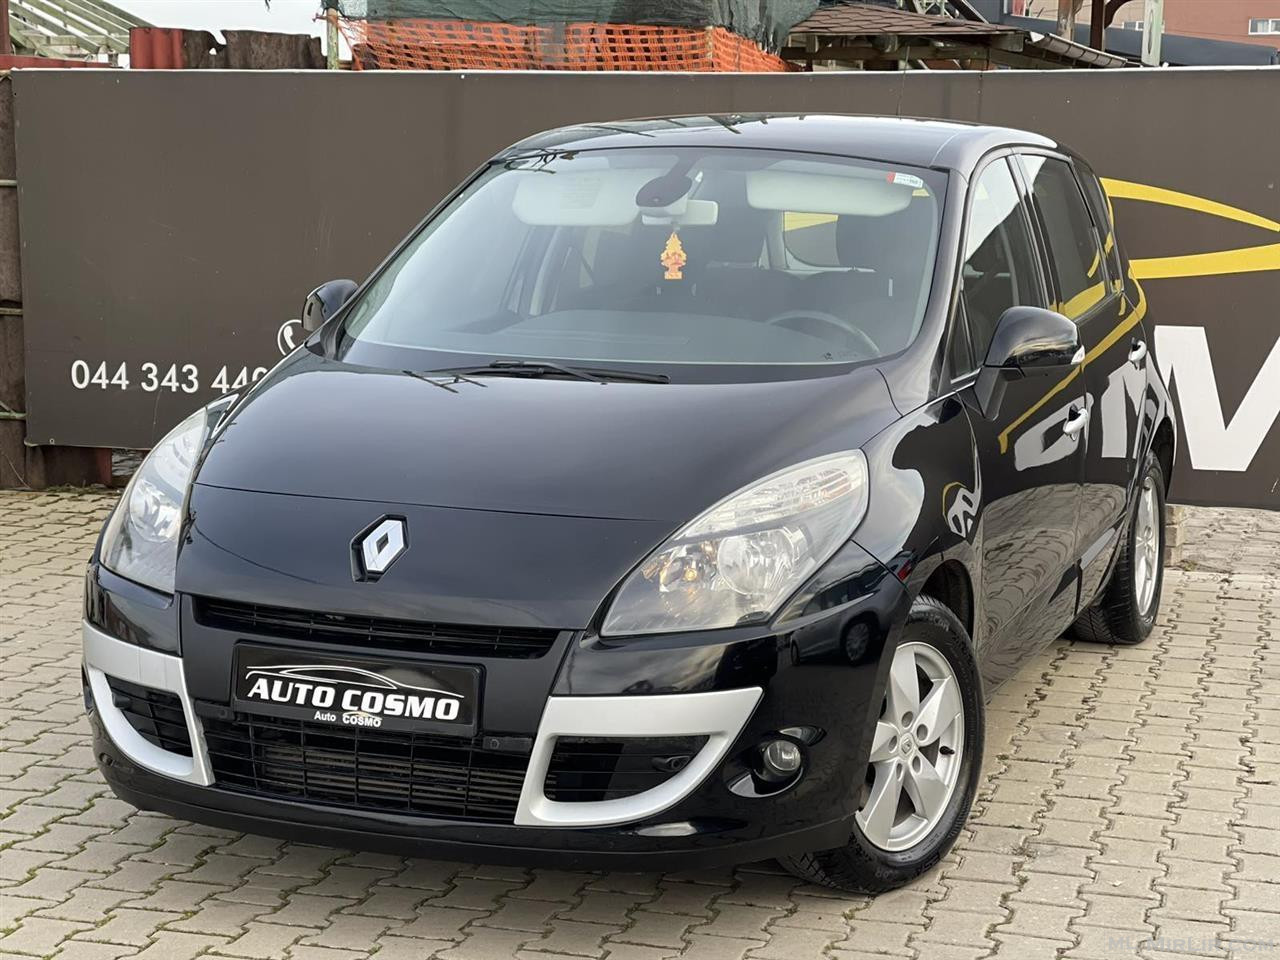 Renault scenic 1.5 dci automatic